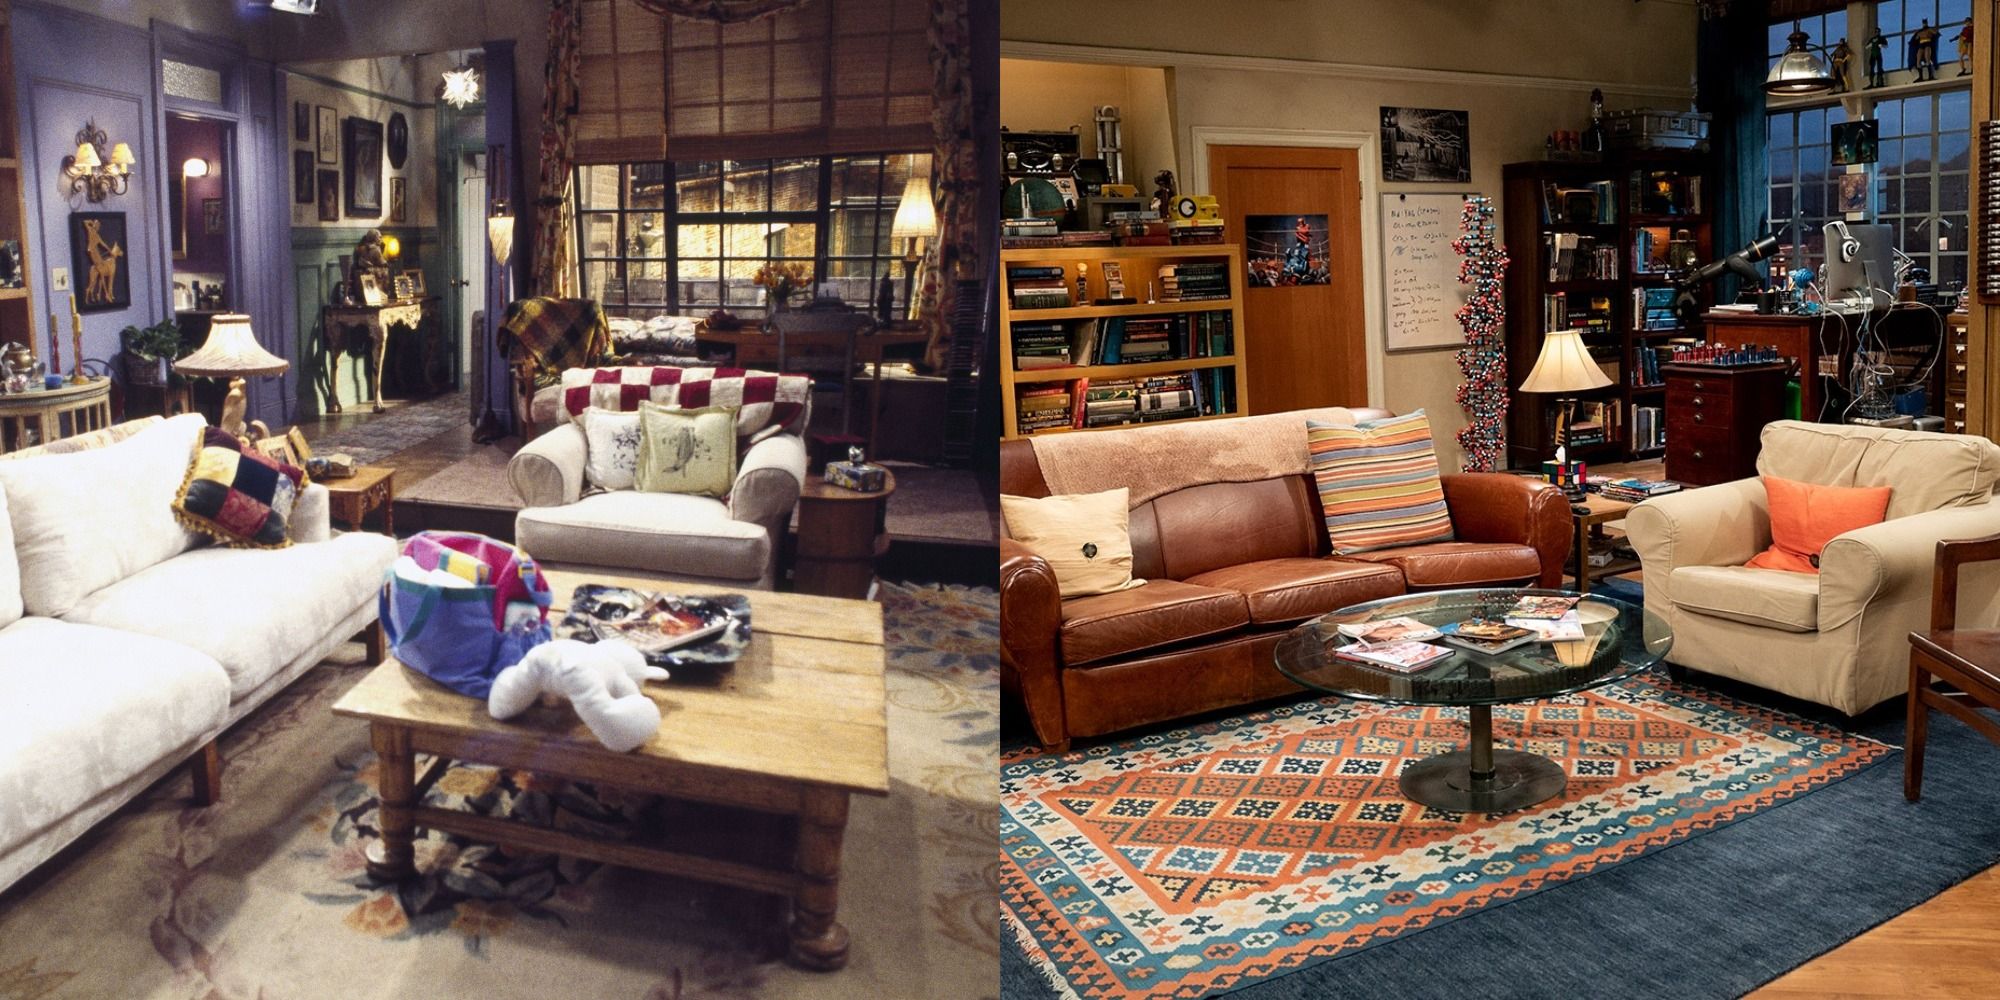 Two side by side images of the apartments from Friends and Big Bang Theory.